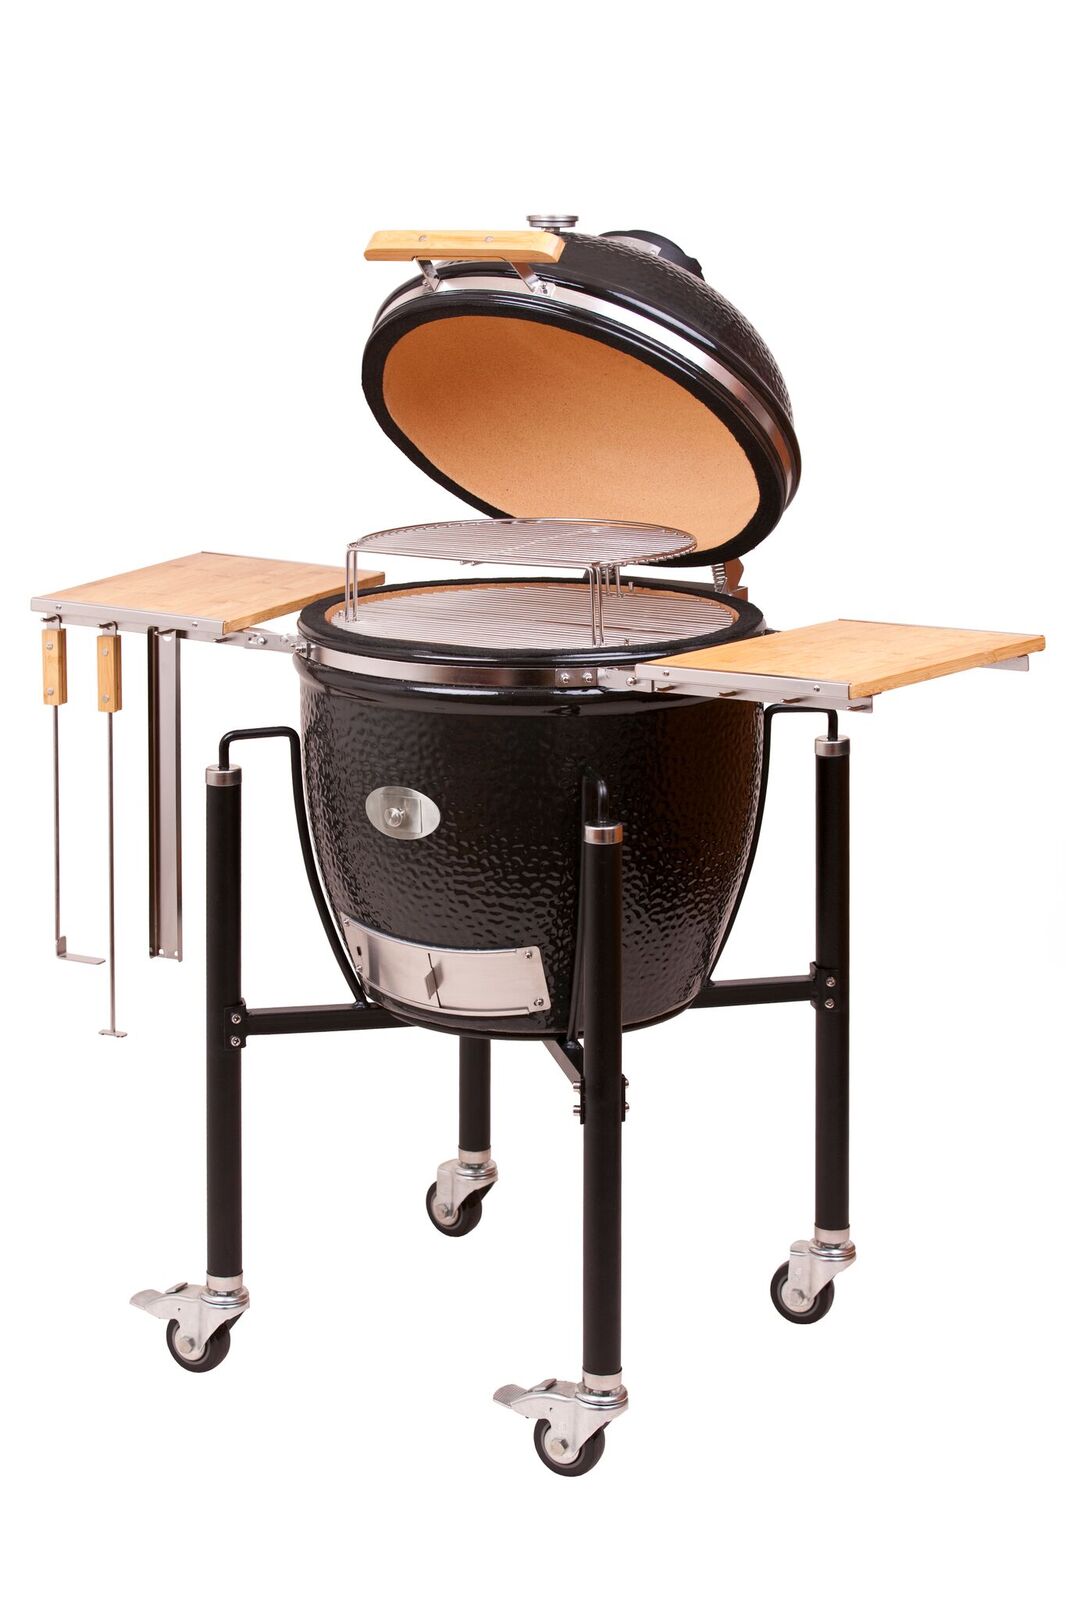 I think the Monolith Classic ceramic grill is the best grill for vegans to cook outdoors